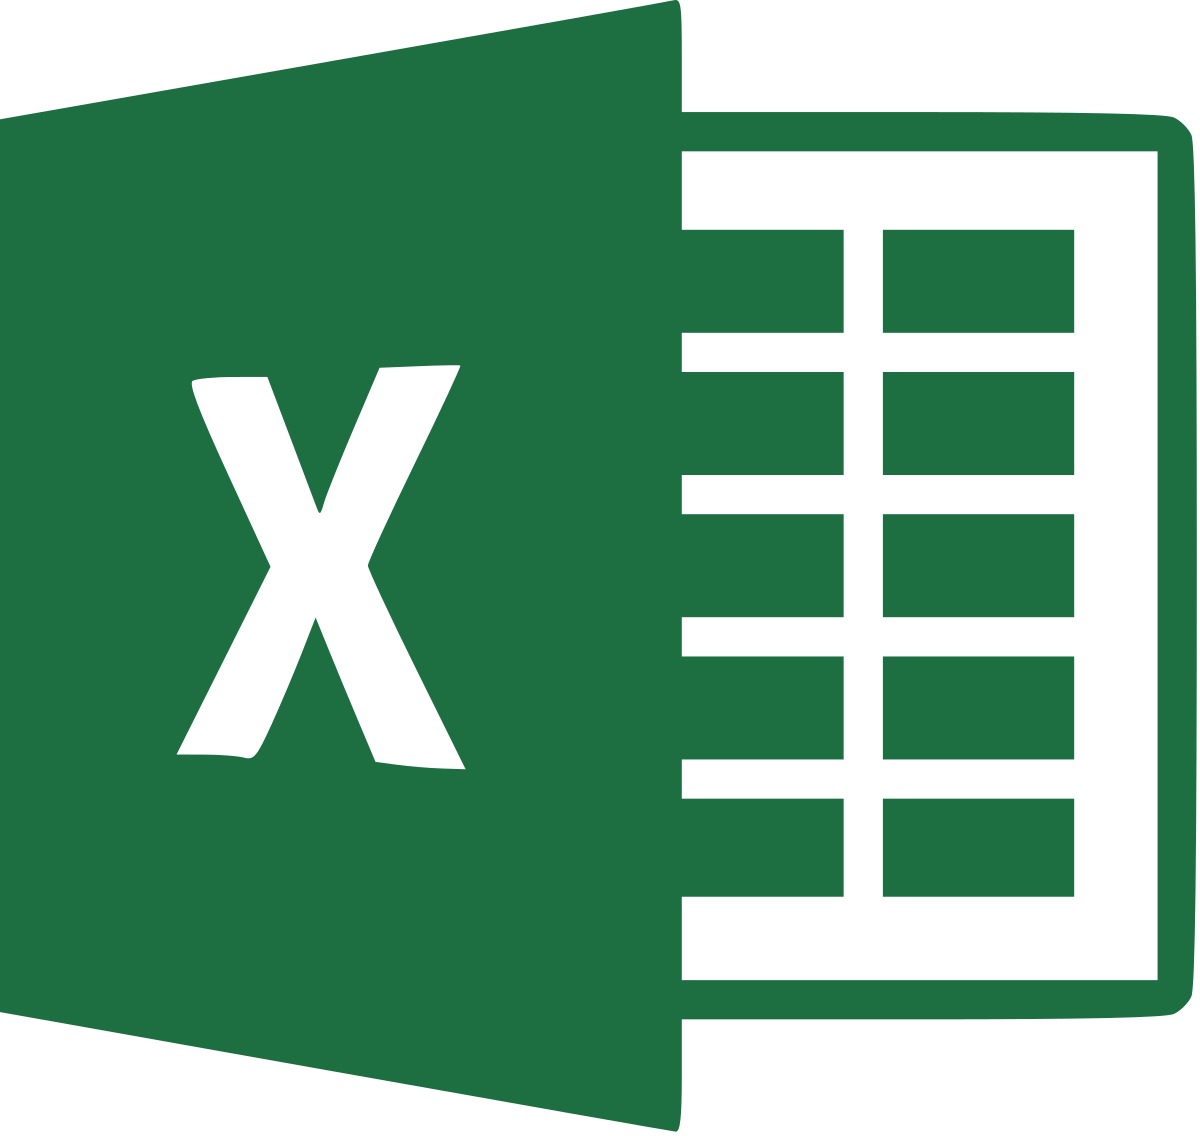 New Version Of Mobile Ms Office Can Convert Photos Into Excel Spreadsheets Notebookcheck Net News